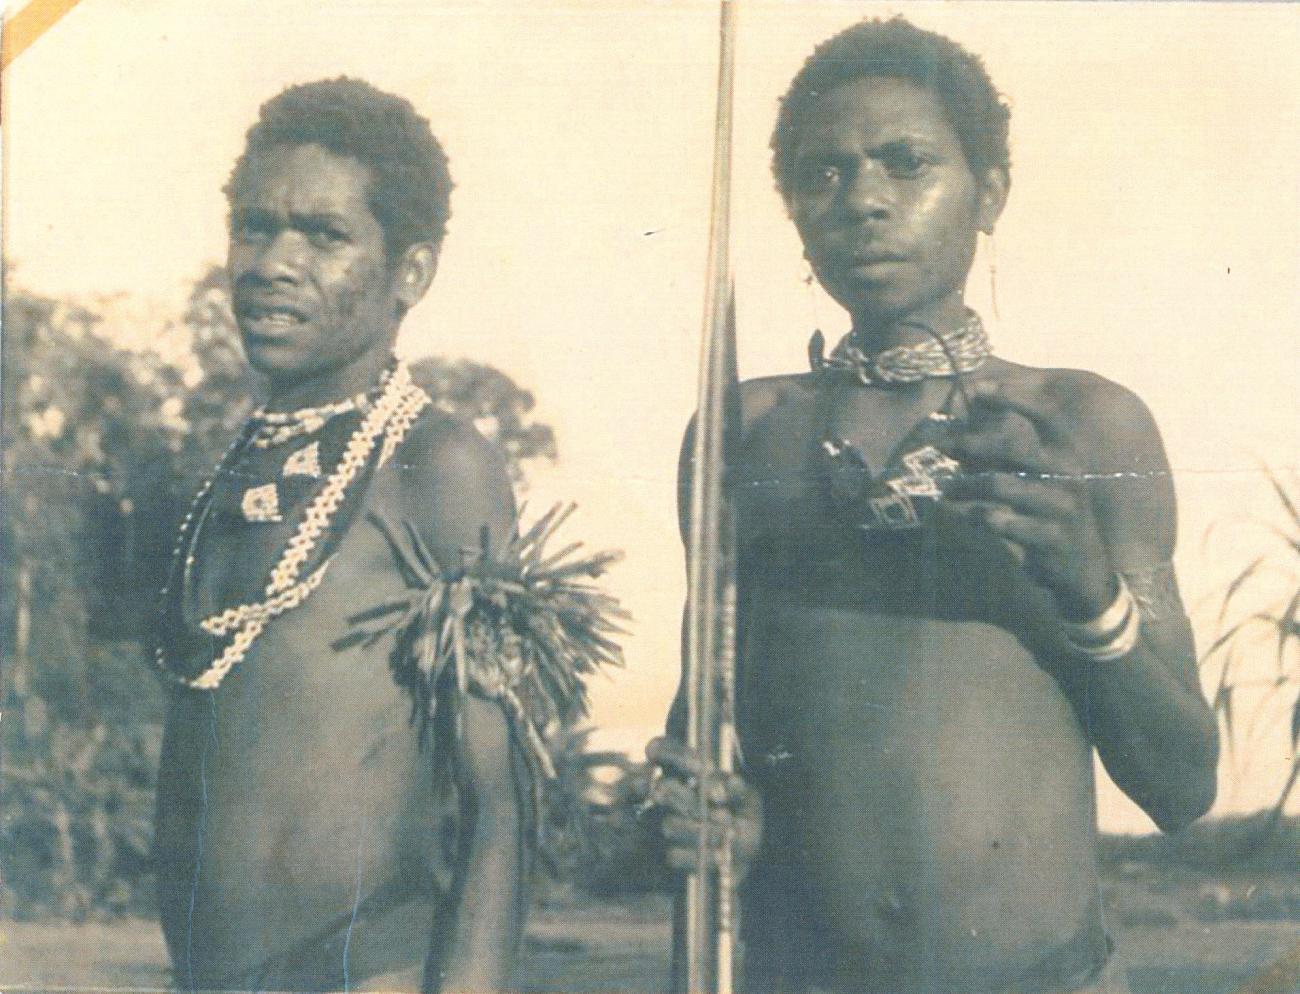 BD/40/89 - 
Two Papua men with neck ornaments
